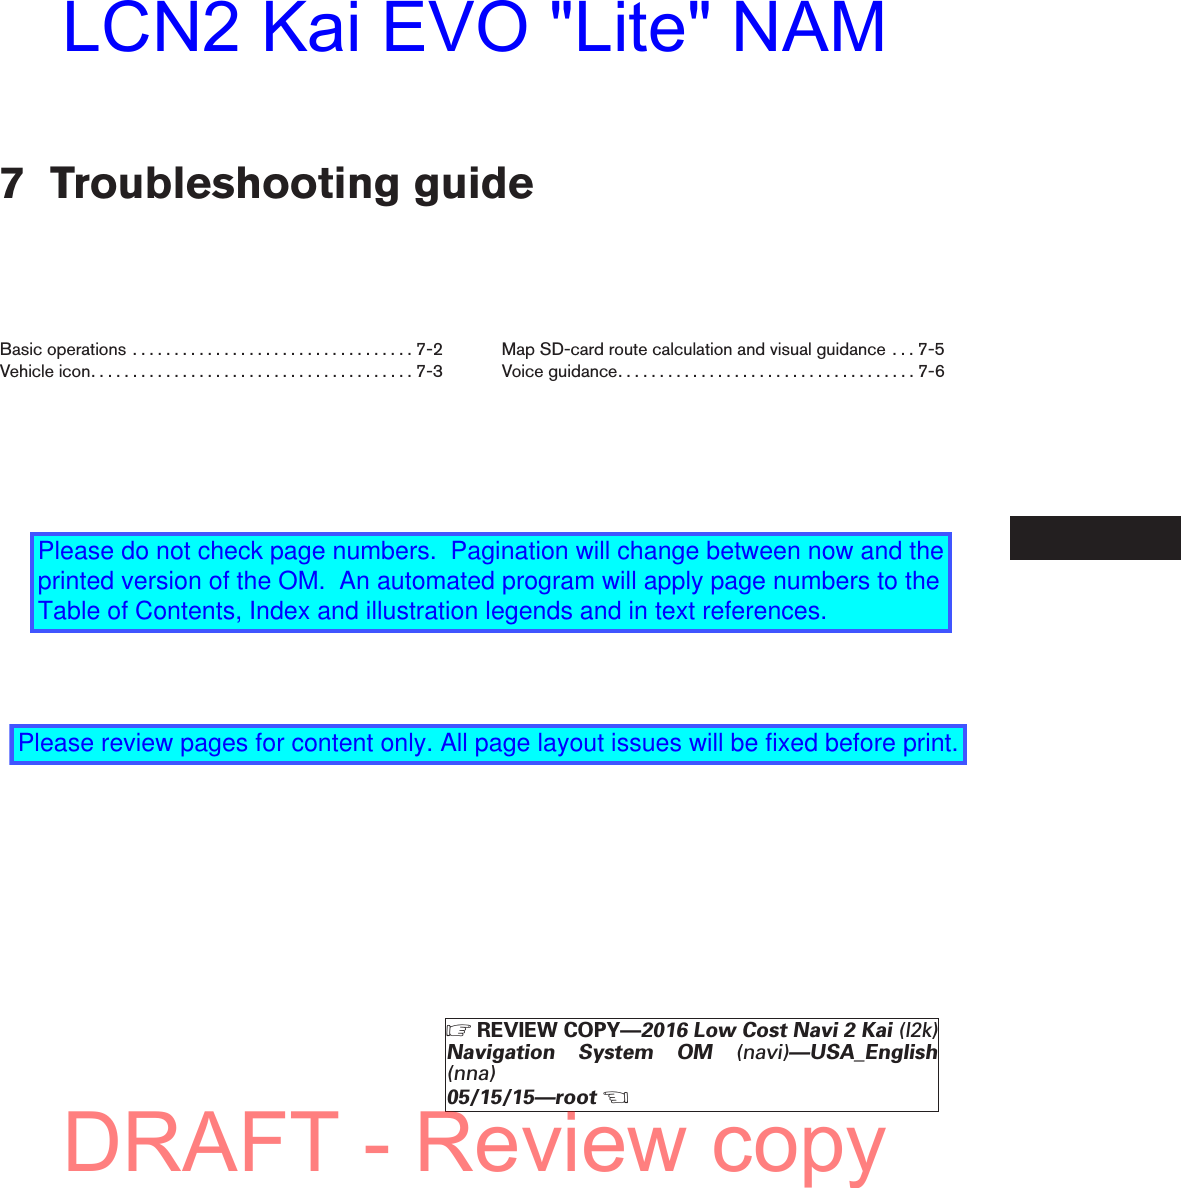 7 Troubleshooting guideBasicoperations ..................................7-2Vehicleicon.......................................7-3Map SD-card route calculation and visual guidance . . . 7-5Voiceguidance....................................7-6੬REVIEW COPY—2016 Low Cost Navi 2 Kai (l2k)Navigation System OM (navi)—USA_English(nna)05/15/15—root੭DRAFT - Review copyLCN2 Kai EVO &quot;Lite&quot; NAMPlease do not check page numbers.  Pagination will change between now and the printed version of the OM.  An automated program will apply page numbers to the Table of Contents, Index and illustration legends and in text references.Please review pages for content only. All page layout issues will be fixed before print.